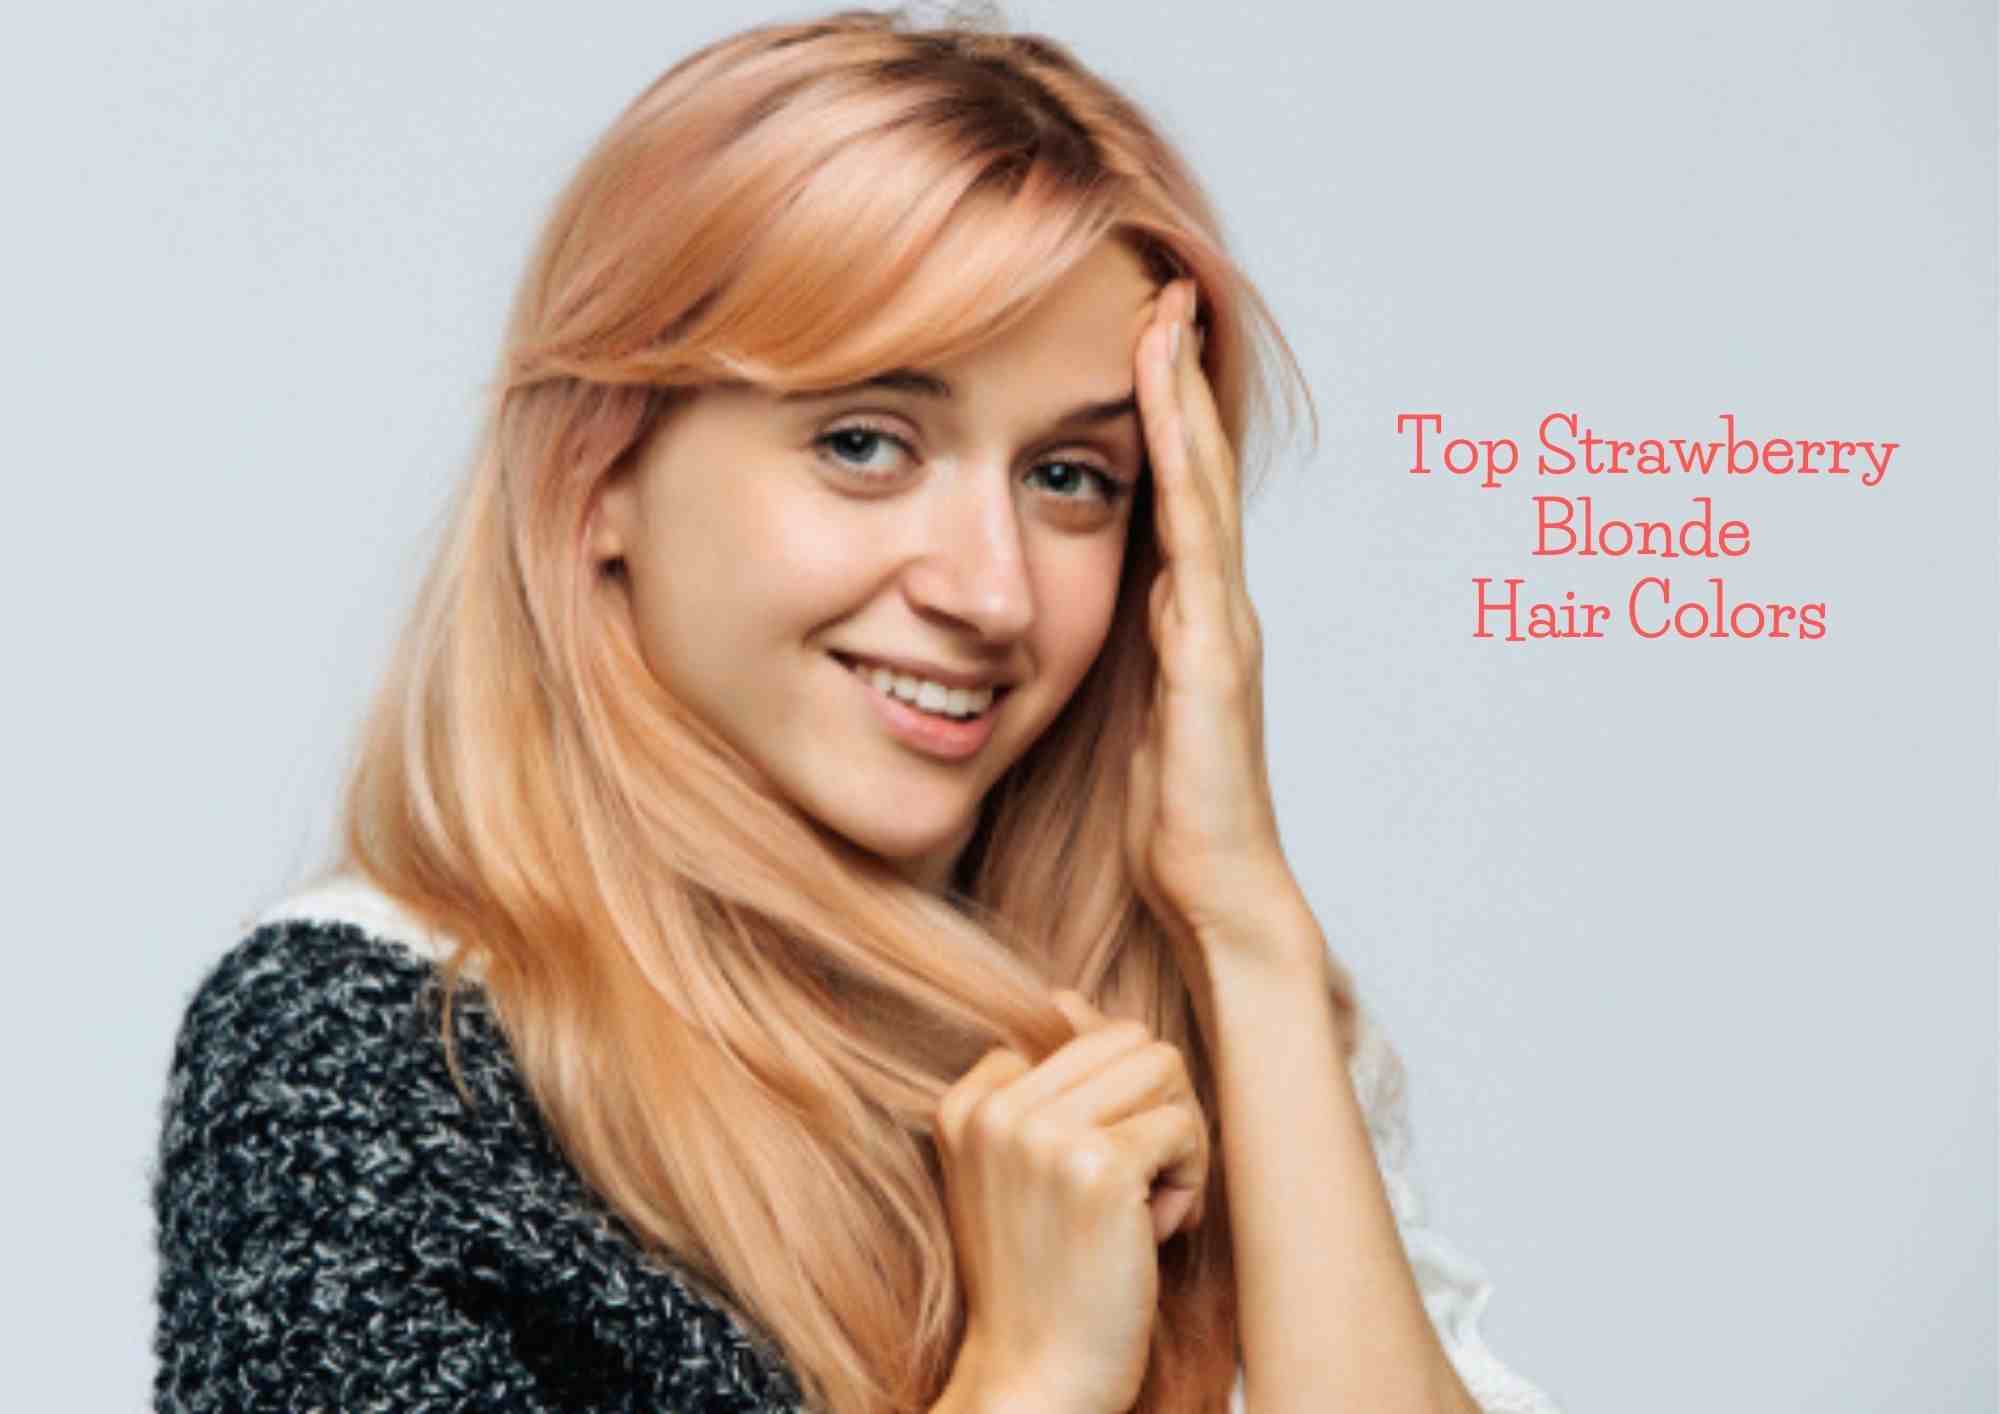 Strawberry Blonde Hair: The Delicate Flavor of Style